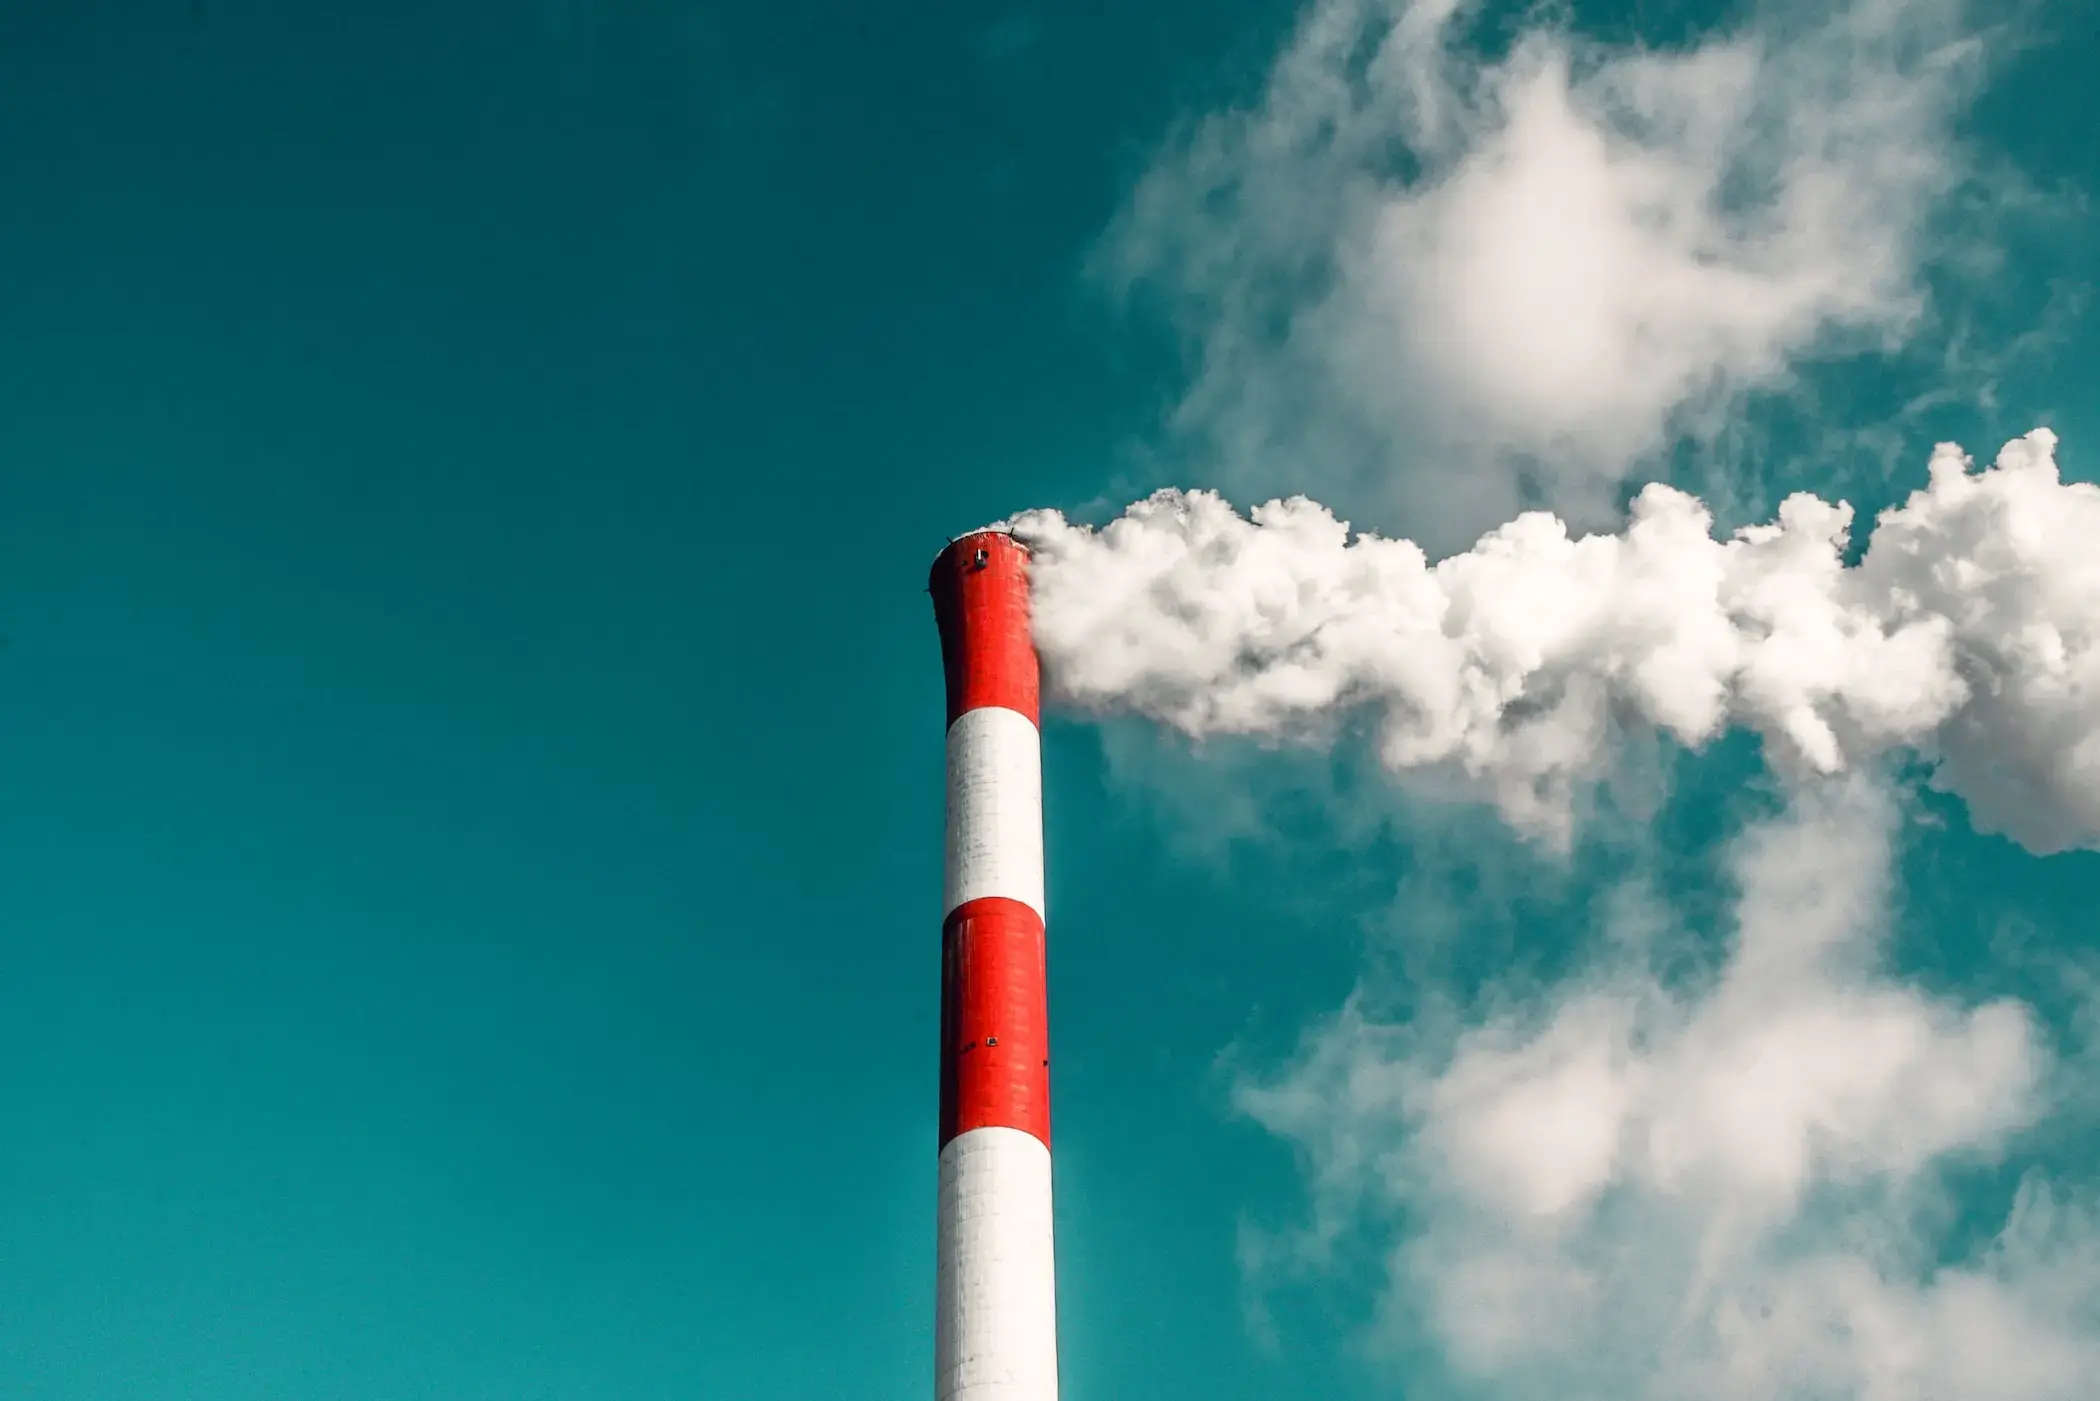 Photograph of a smoke stack with white smoke billowing out.